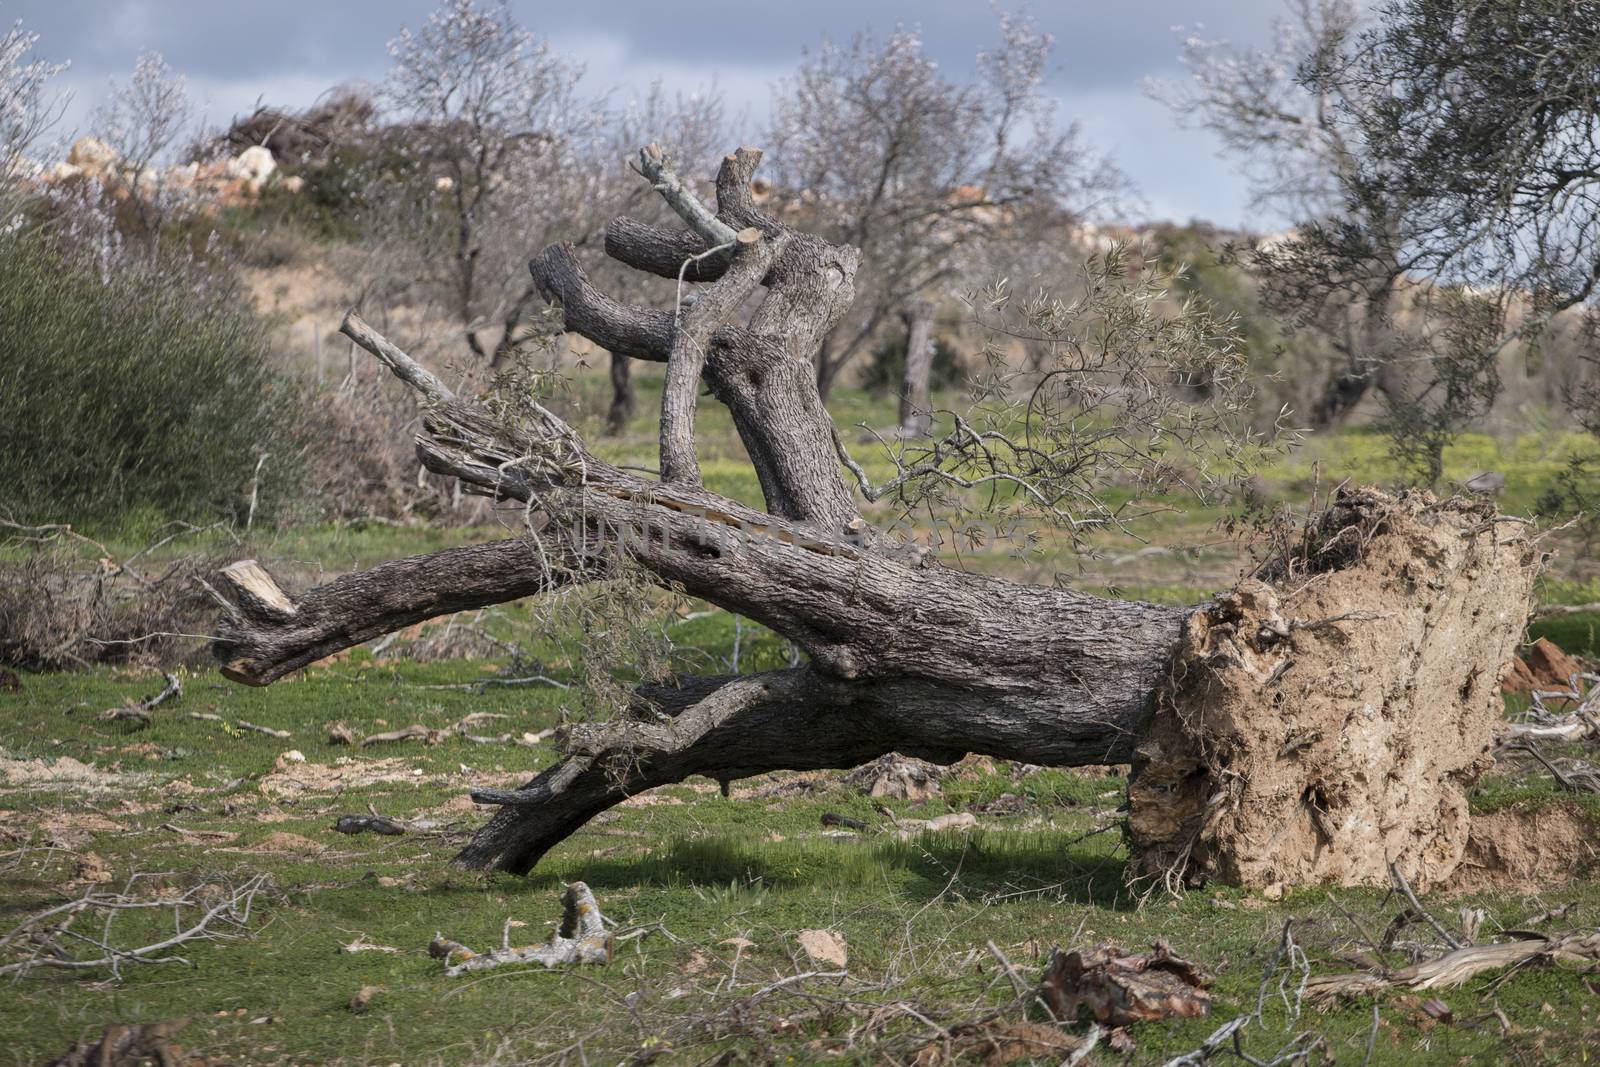 View of a olive tree ripped to the root level.